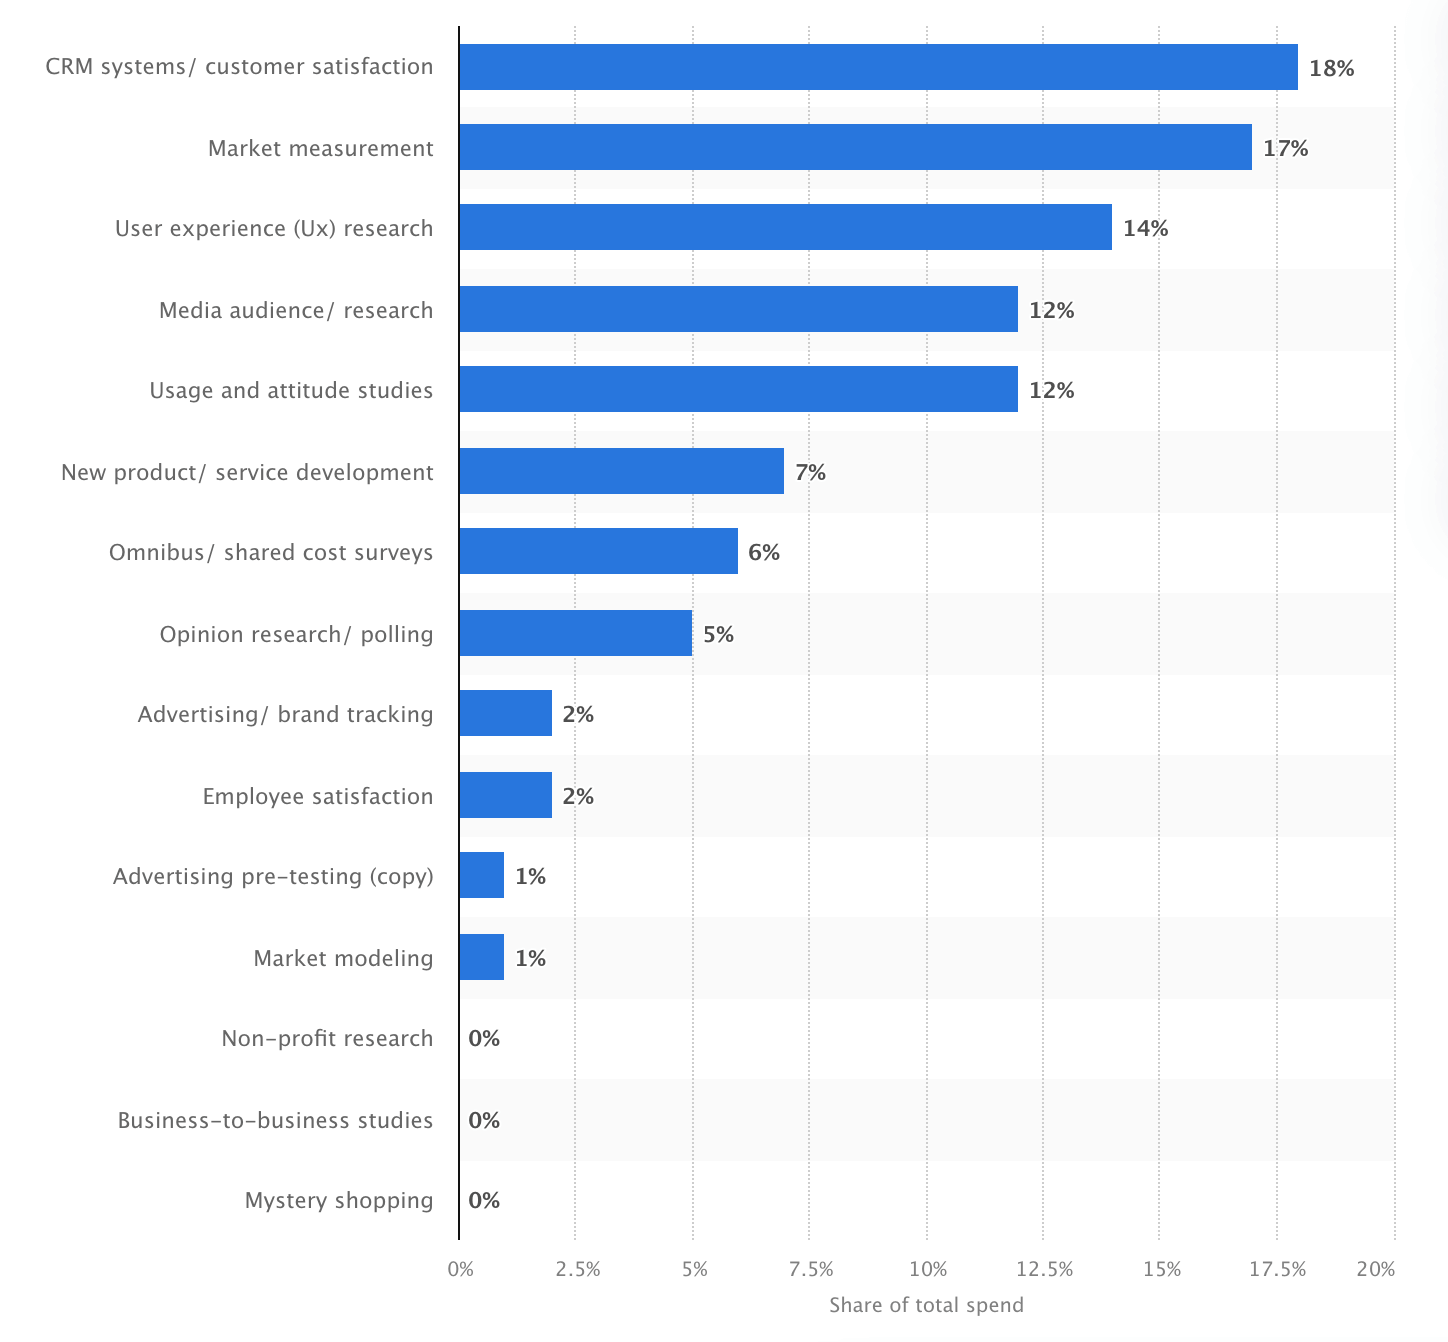 A chart showing the distribution of market research spend in the U.S. based on the research type. CRM/customer satisfaction holds an 18% share of total spending, then market measurement (17%), then UX research (14%).